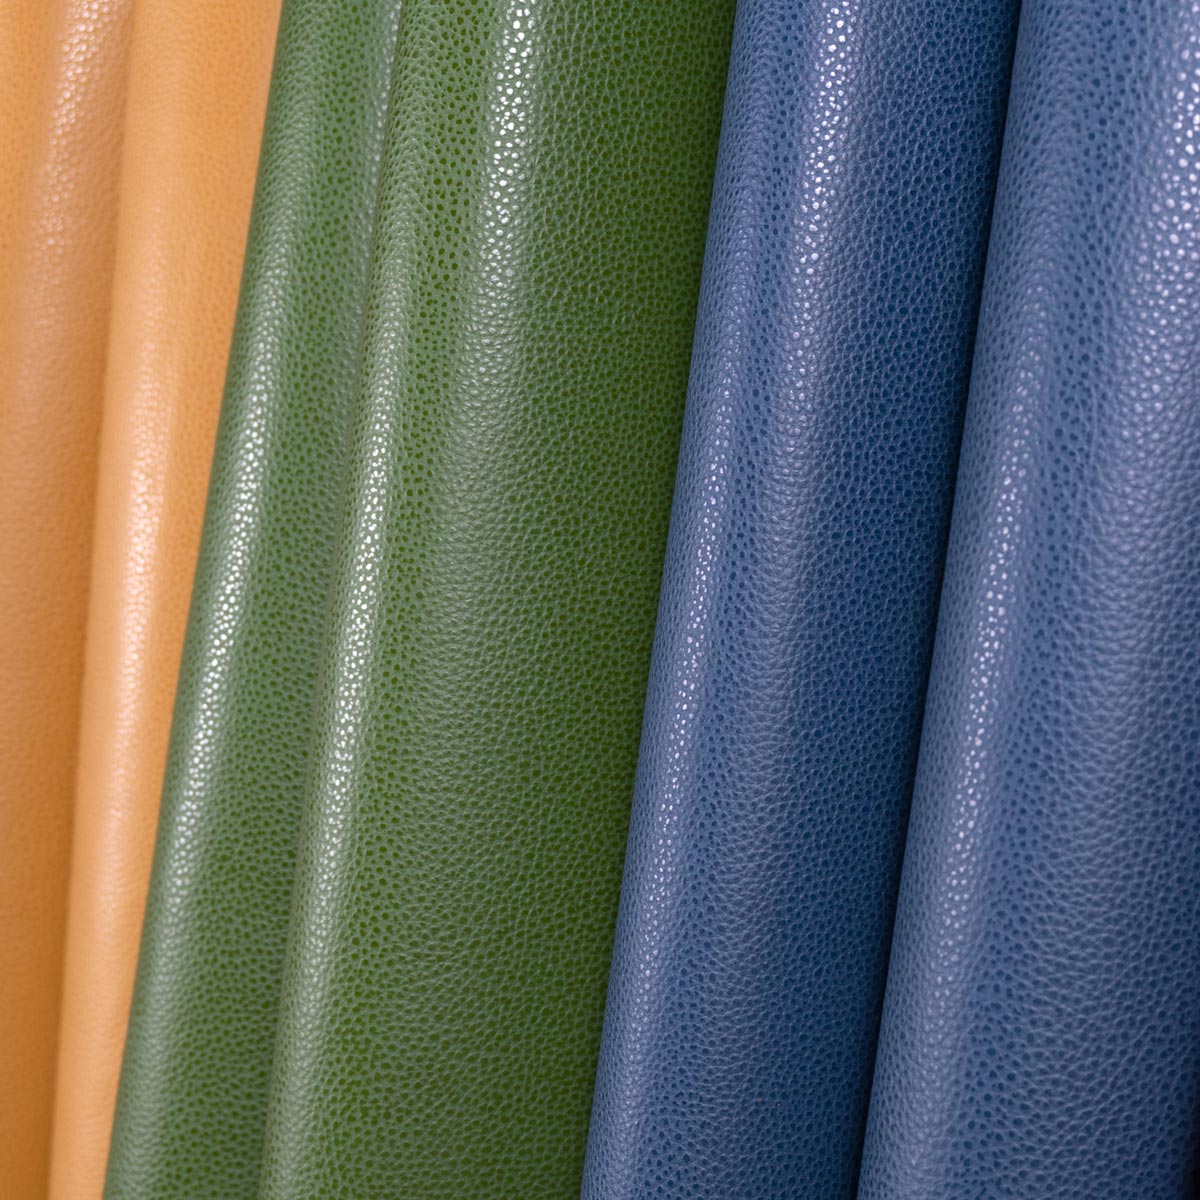 Metro hand-tipped leather from Jamie Stern